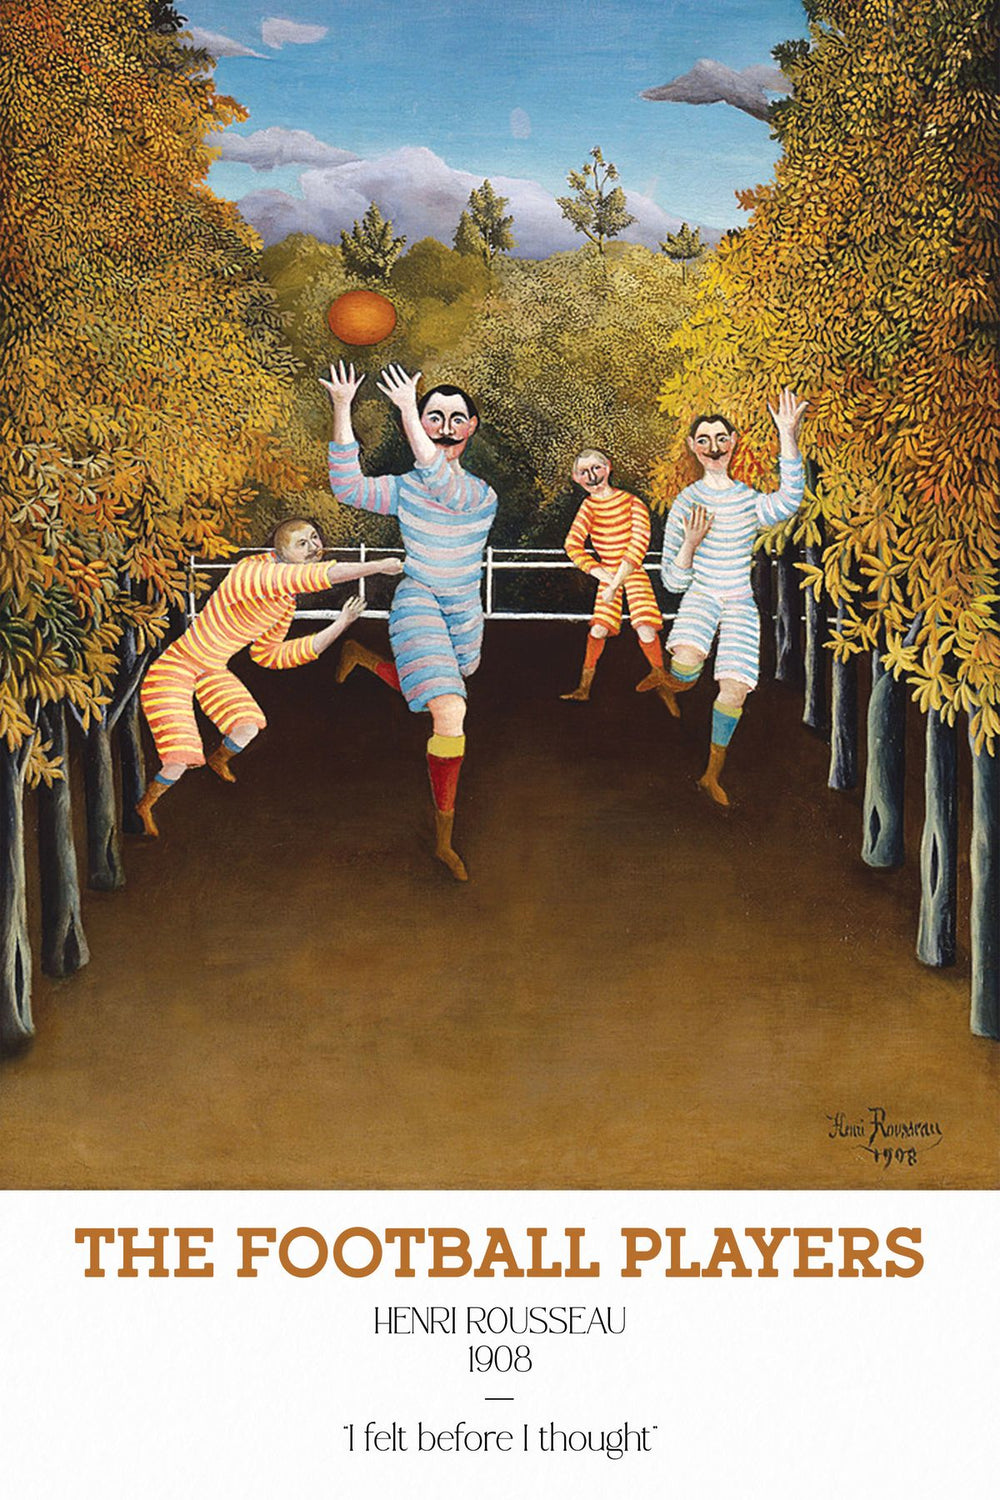 Football Players Rousseau Exhibition Poster